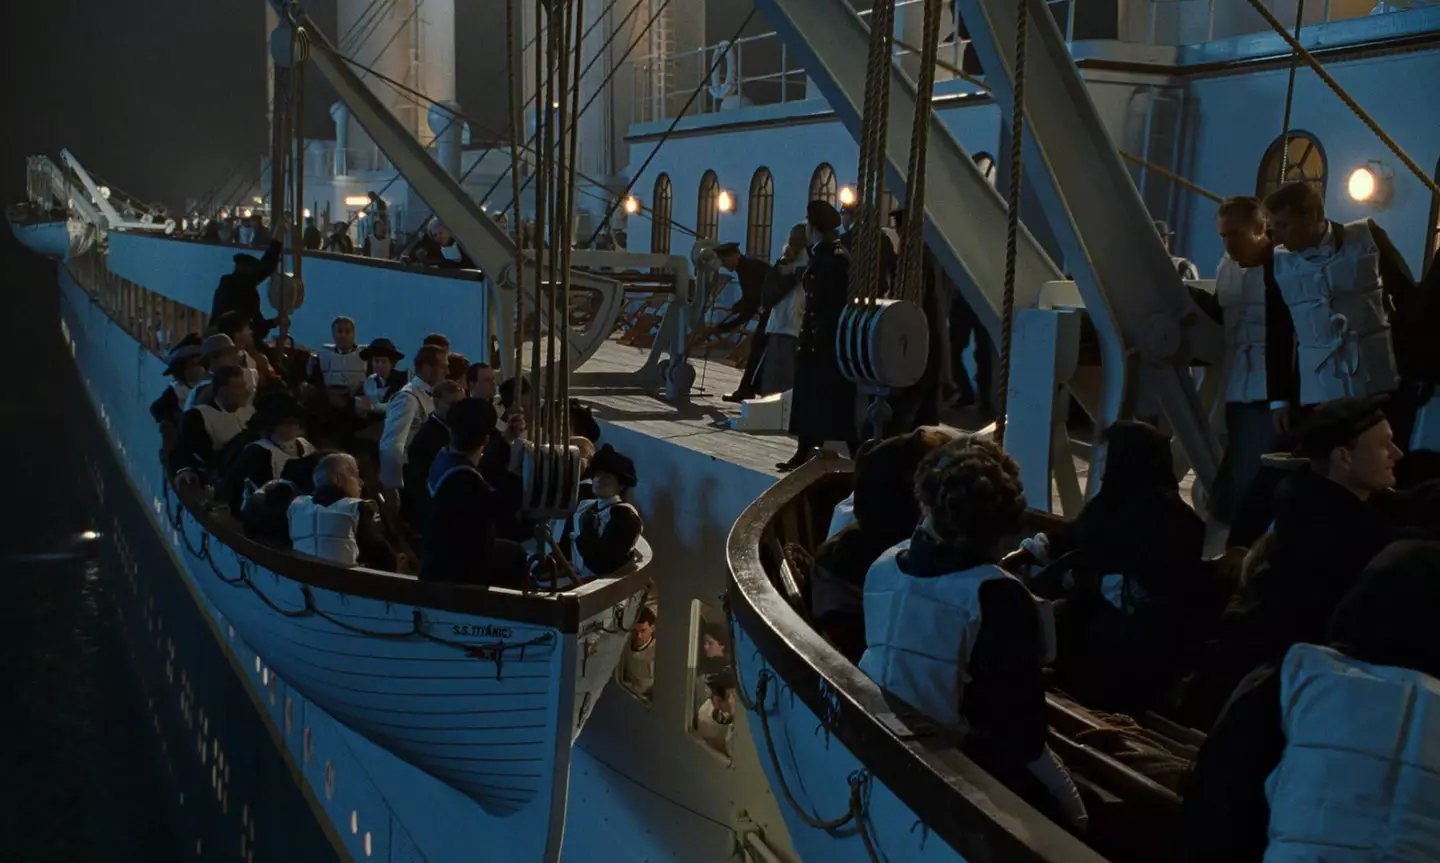 How well do you know the ins and outs of Titanic?